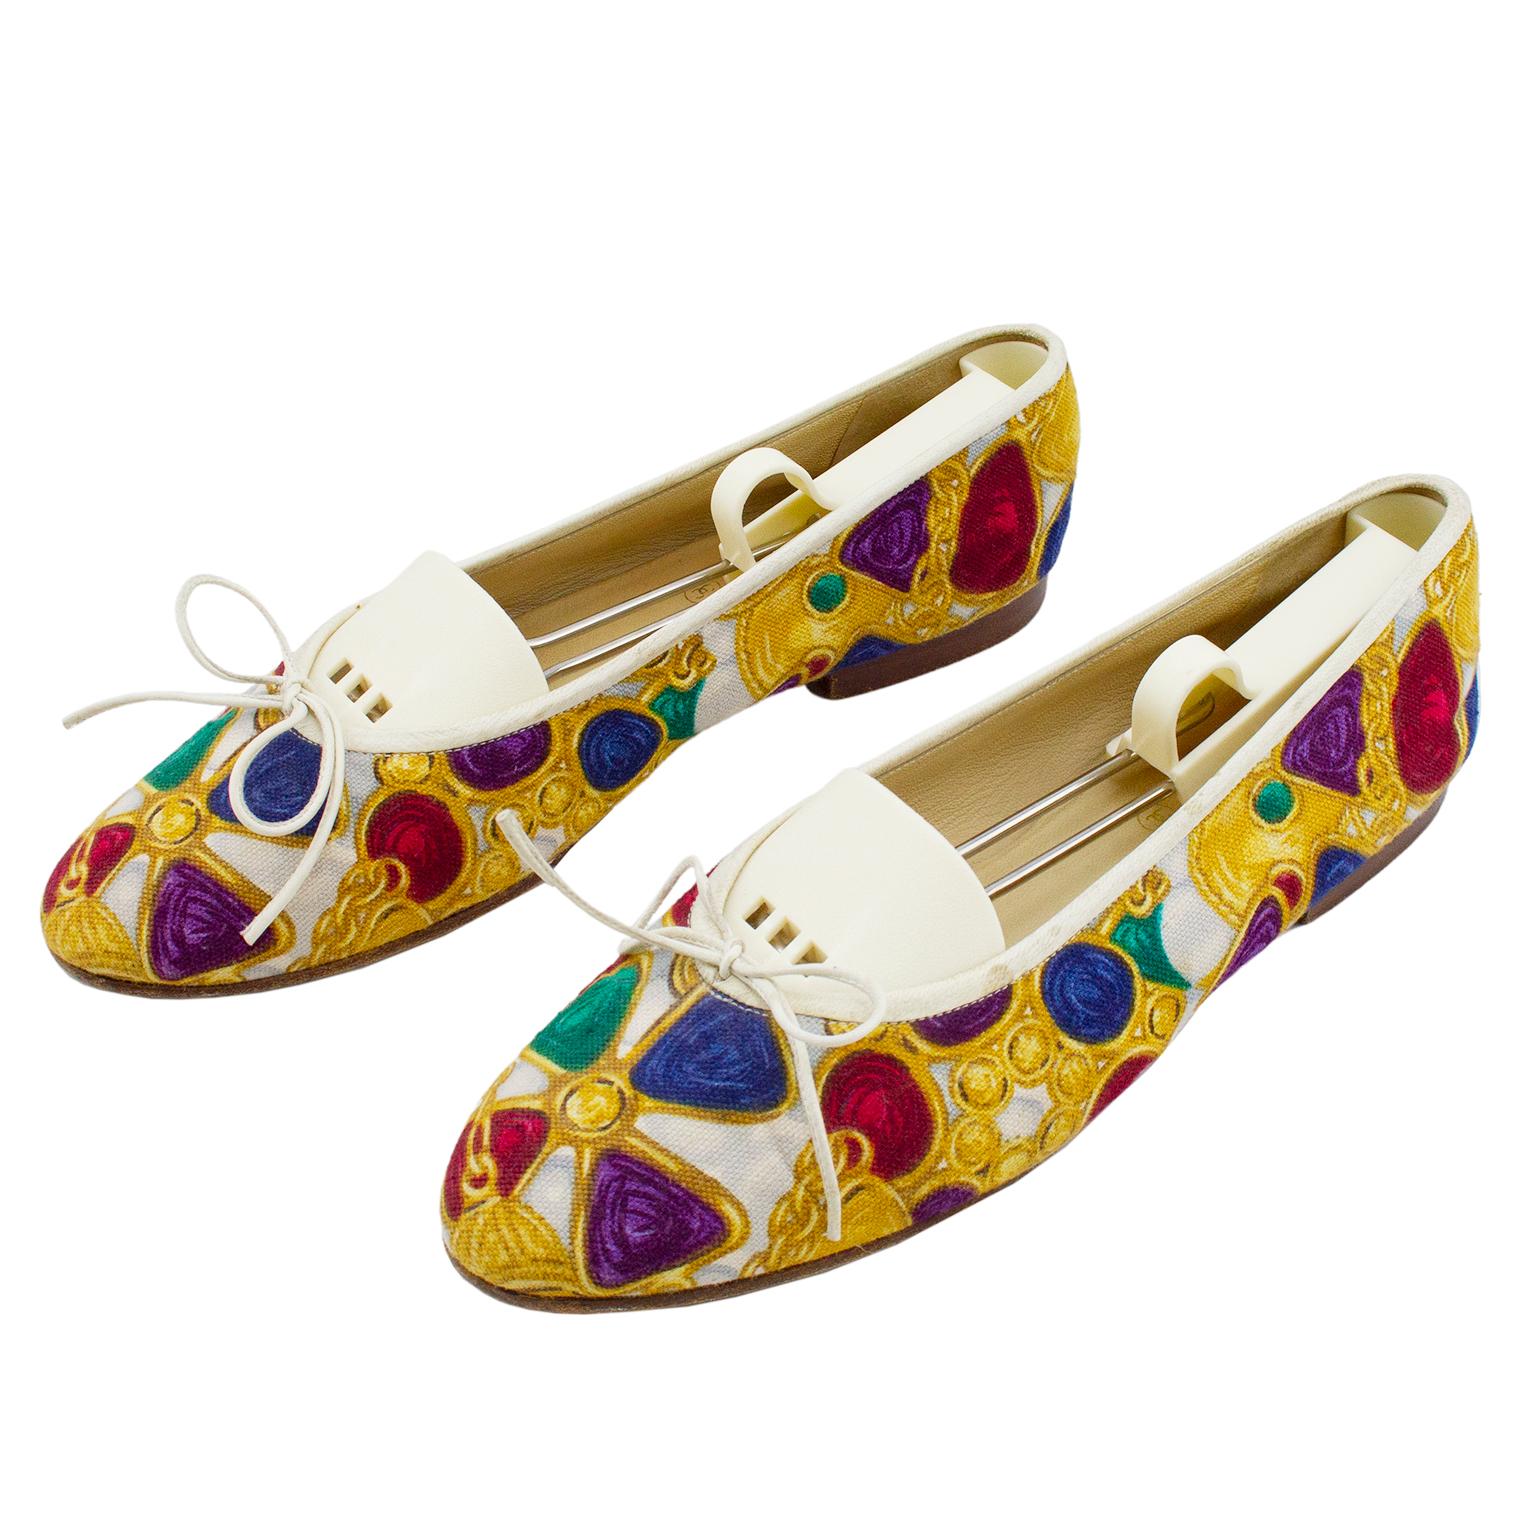 Hard to find 1990's Chanel classic ballet flat in white leather and all over print Gripoix gem fabric. This collection was a bold departure from the classic leather ballet flat and was sold out very quickly. This pair is in good vintage condition